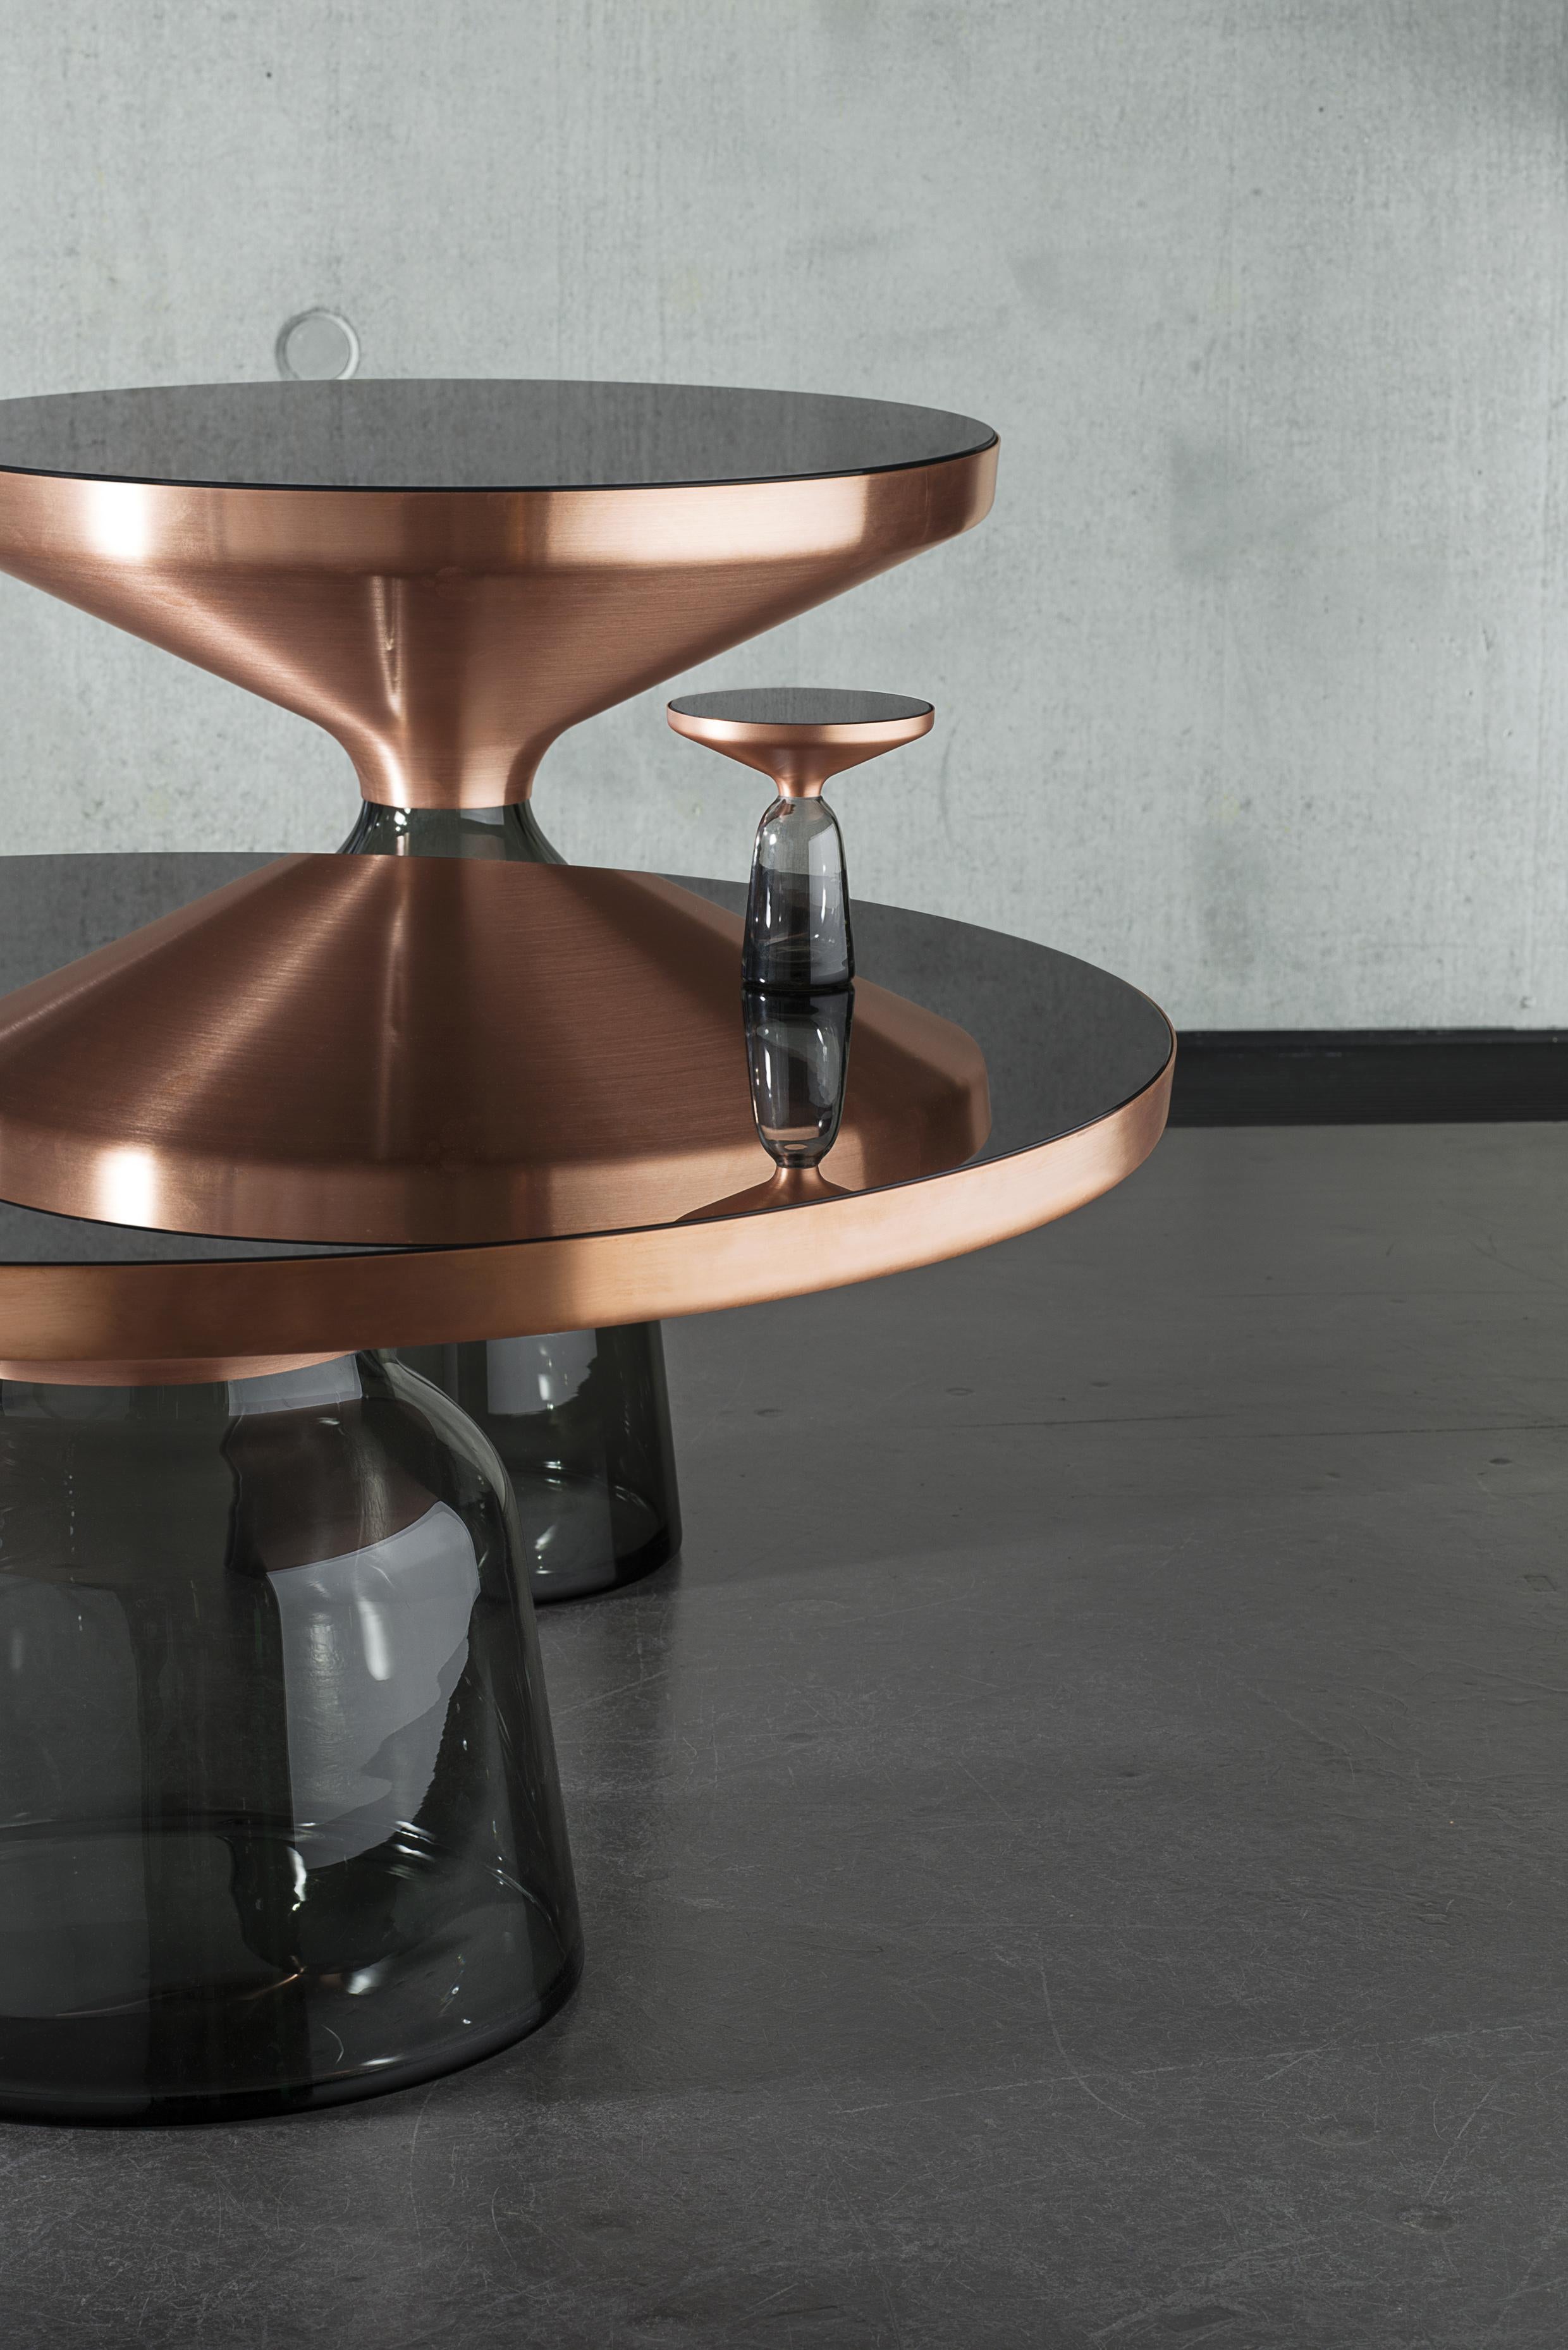 German ClassiCon Miniature Bell Side Table in Copper and Grey by Sebastian Herkner